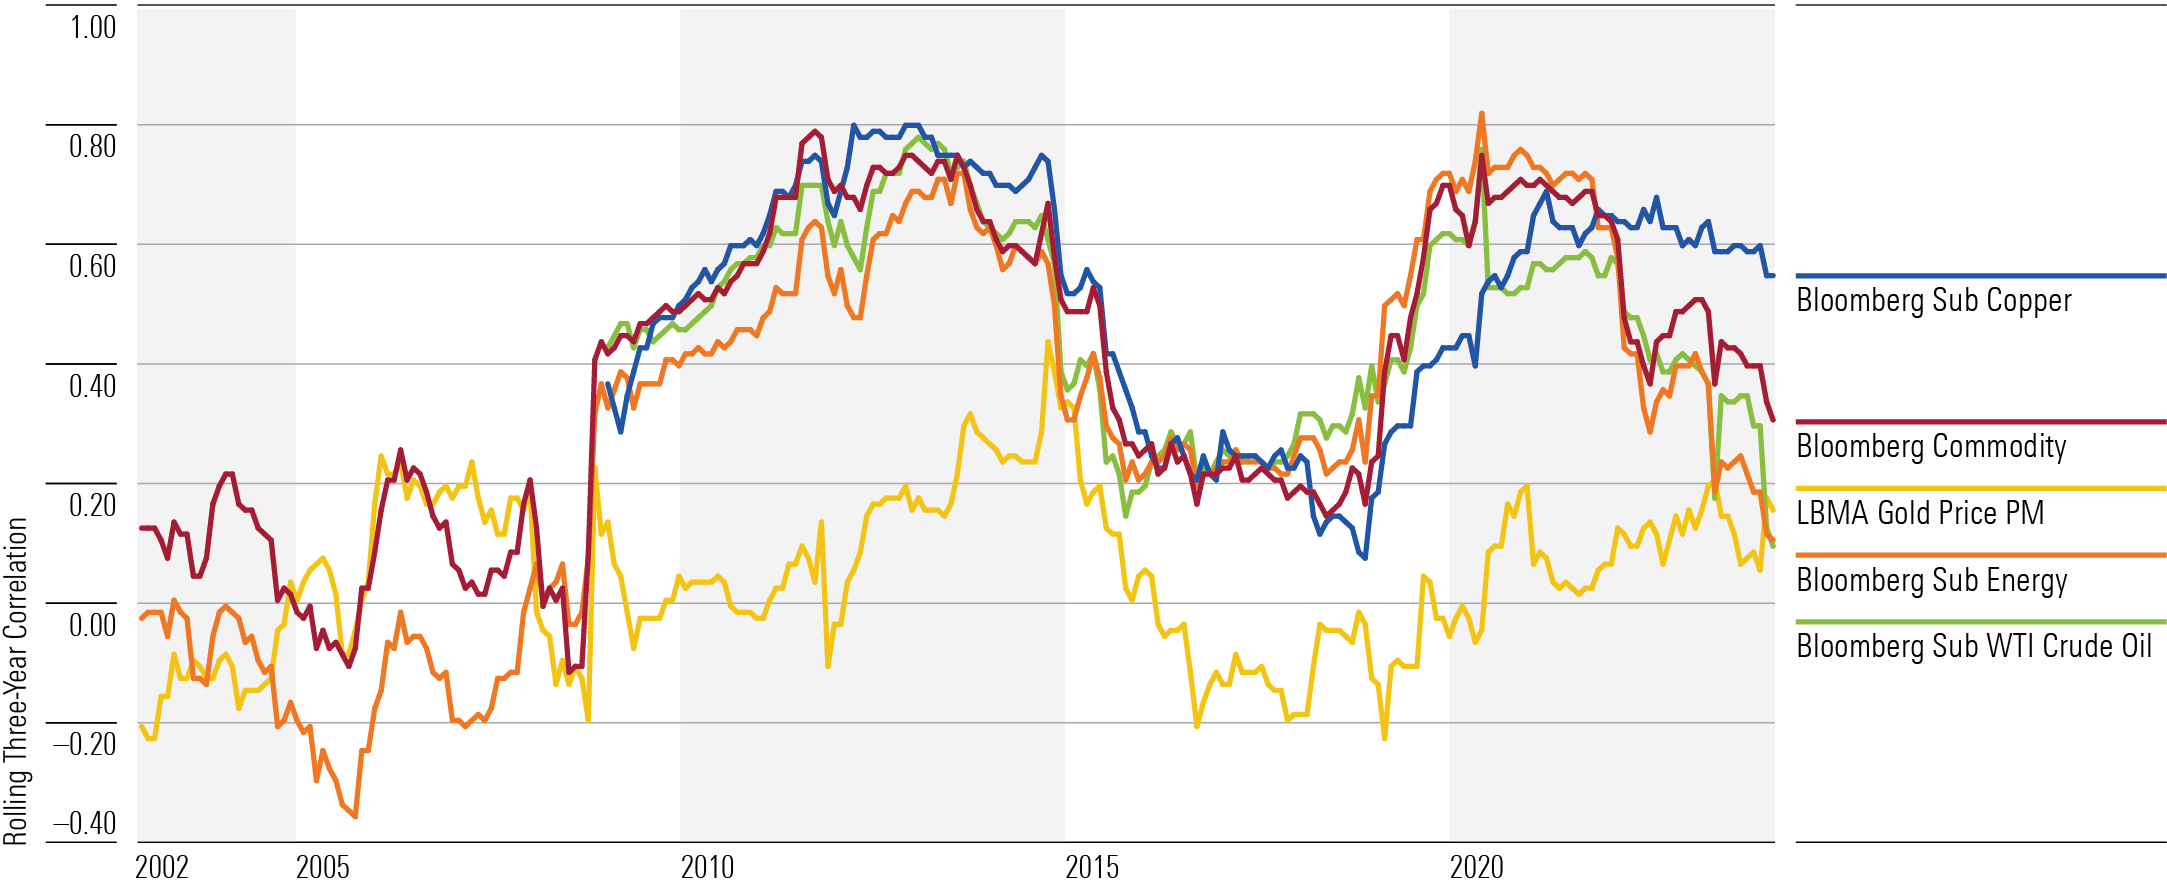 A line graph showing the rolling three-year correlations for several commodity indexes.